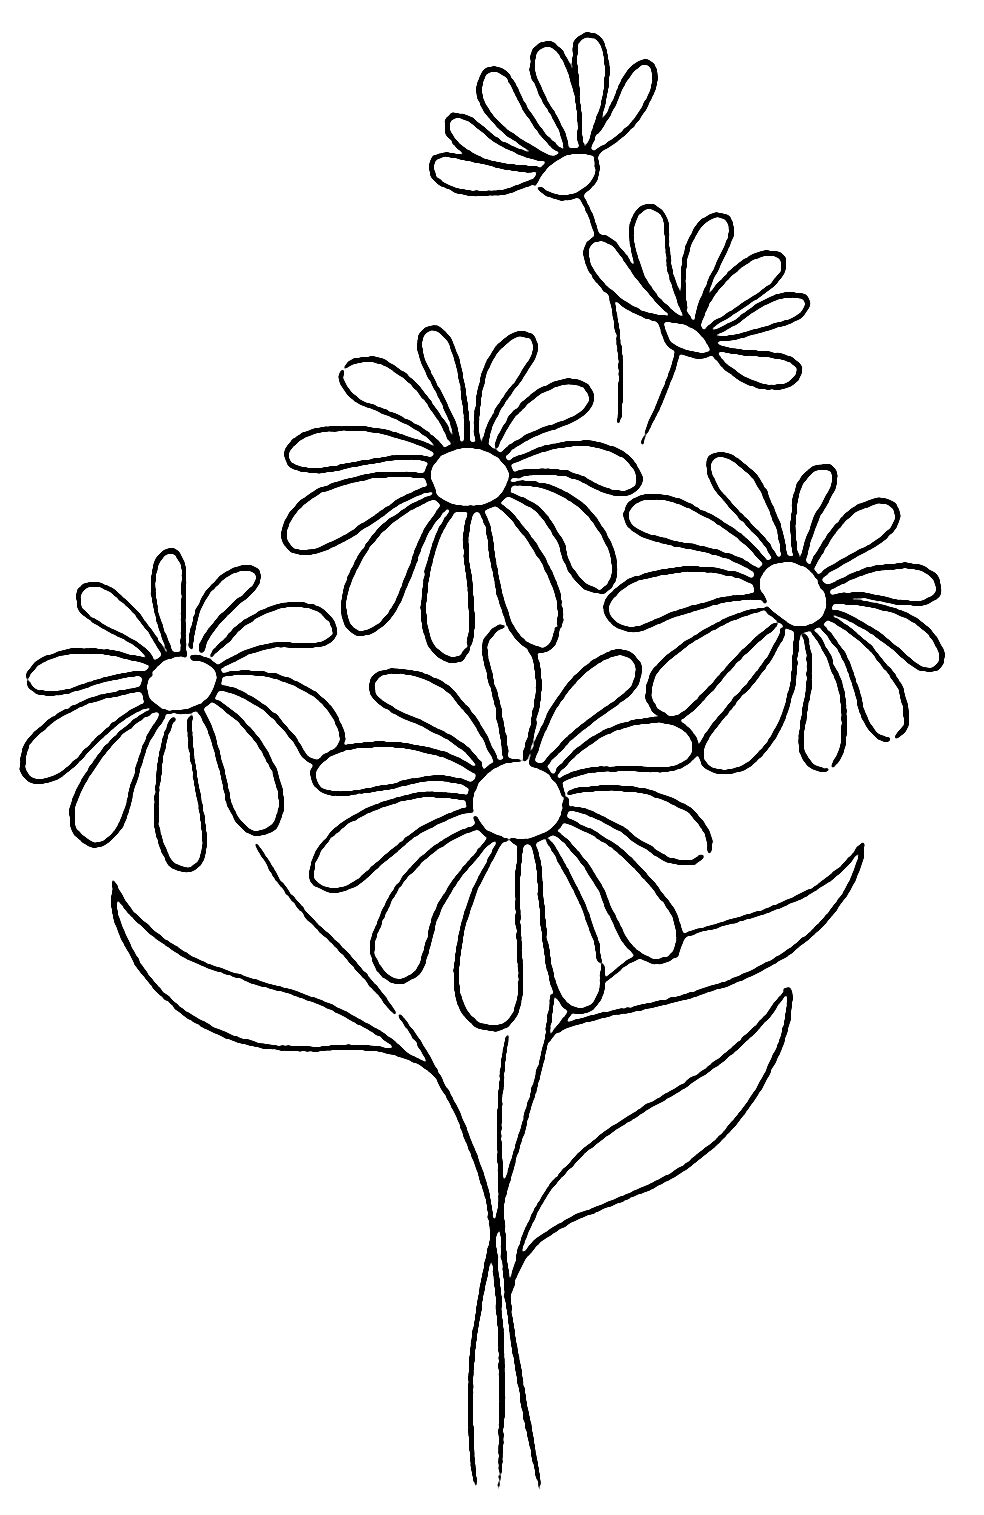 Daisy pages â printable pages